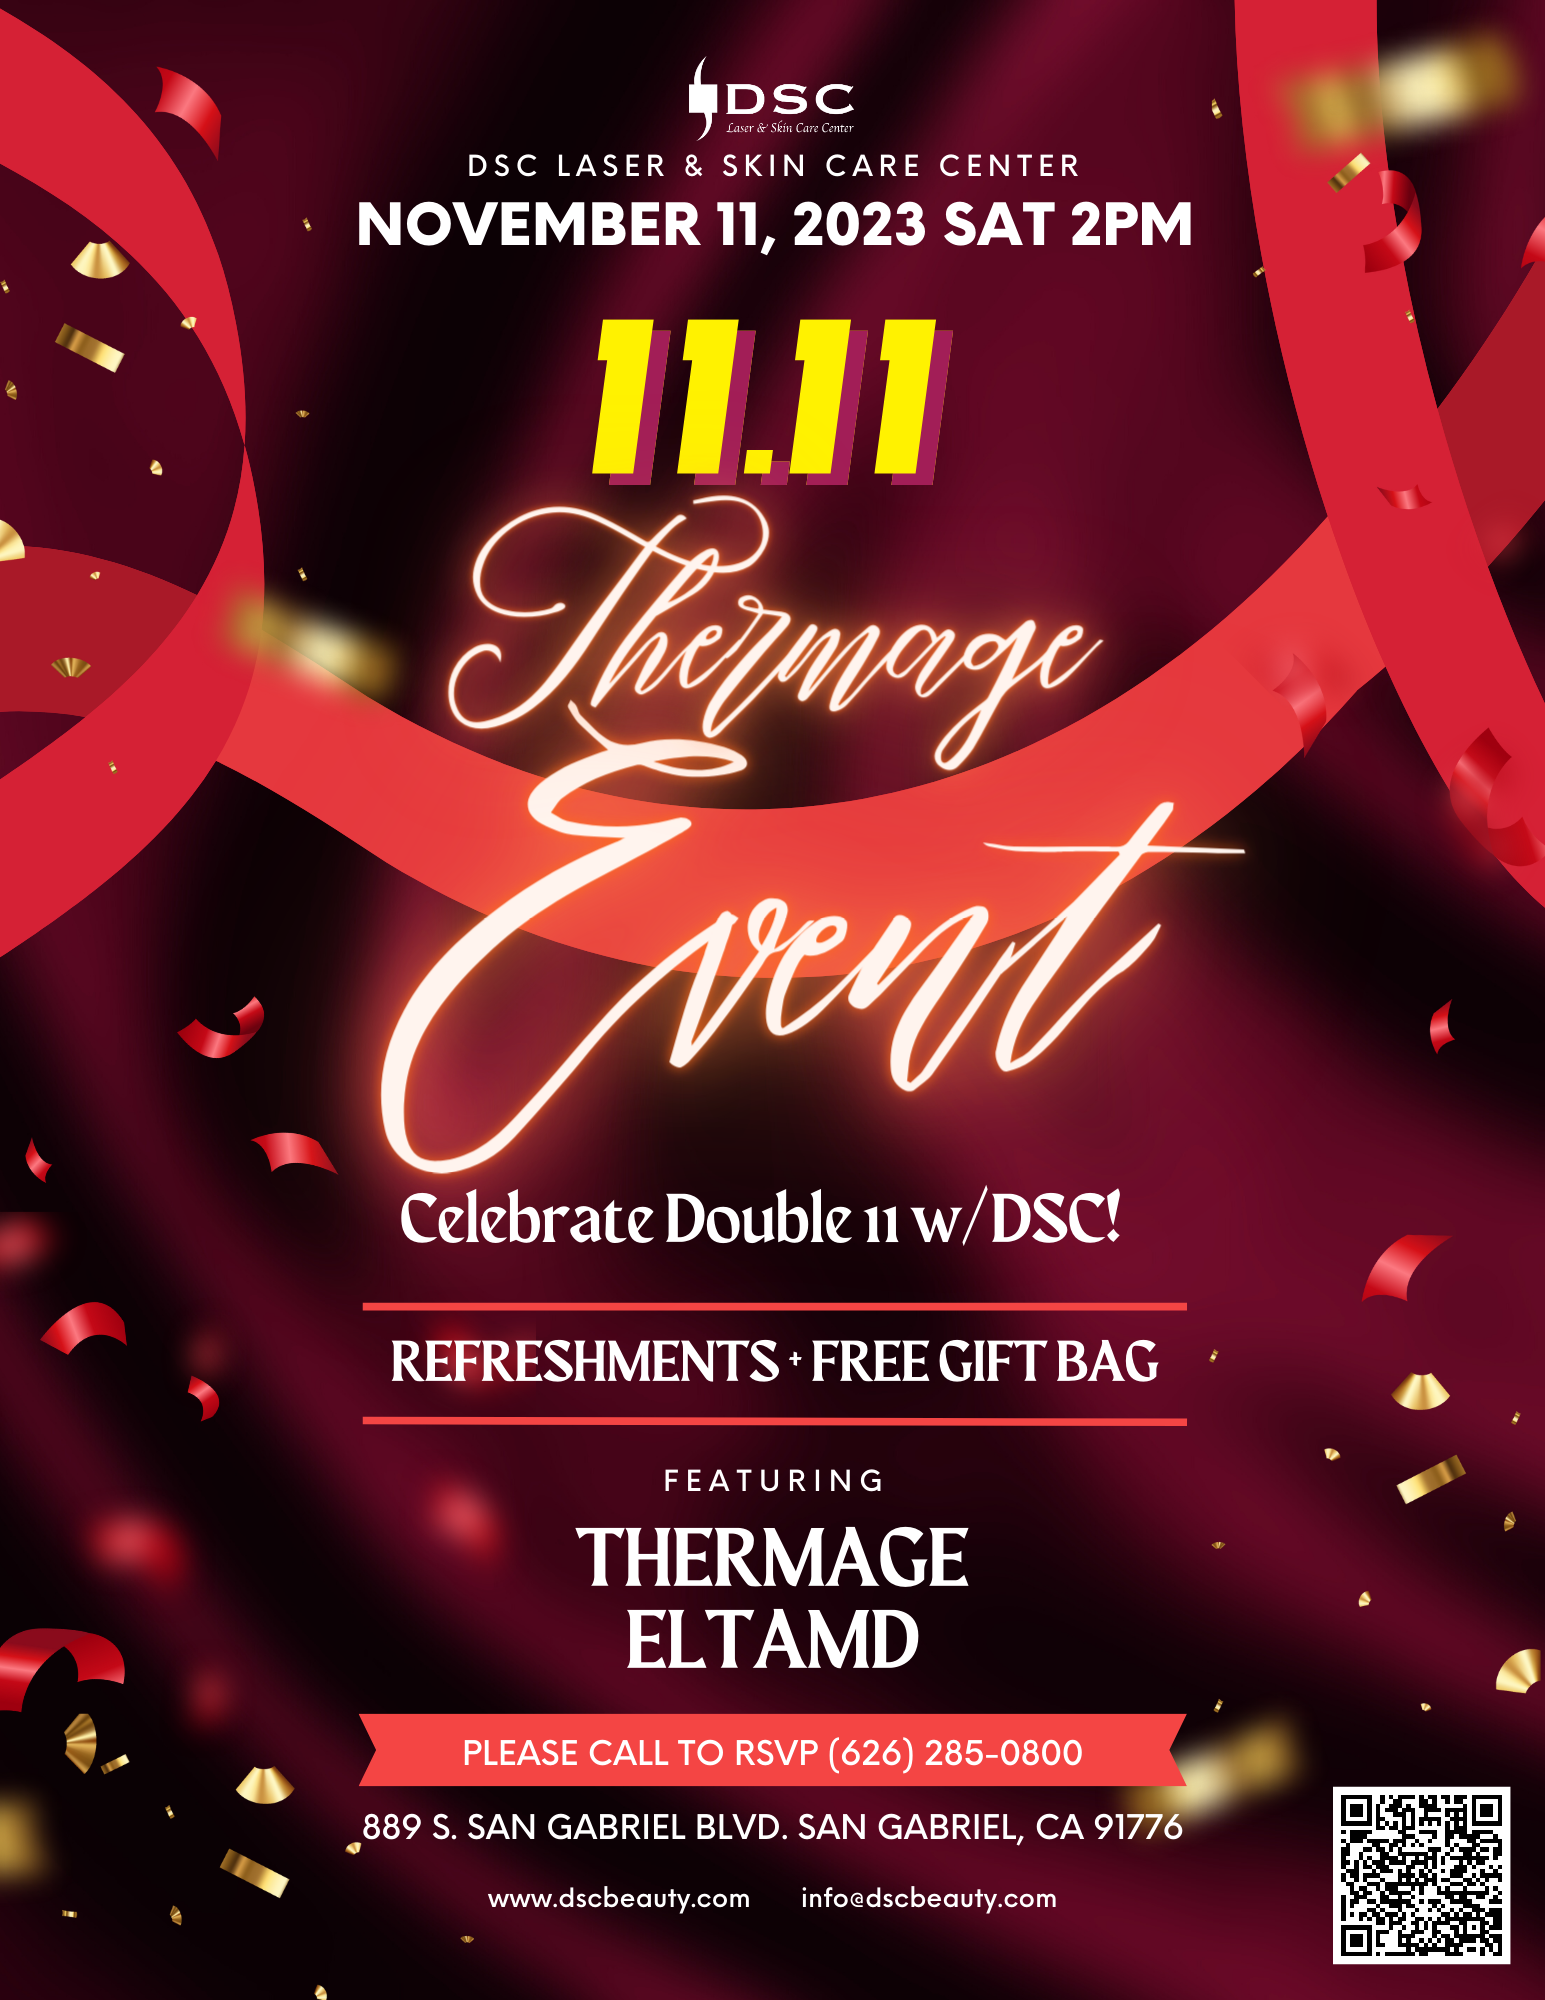 DSC 11/11 Singles' Day Thermage Event Flyer 2023 featuring red background and confetti shimmer with red ribbon and the text "11.11" over " Thermage Event" and "Celebrate double 11 with DSC"